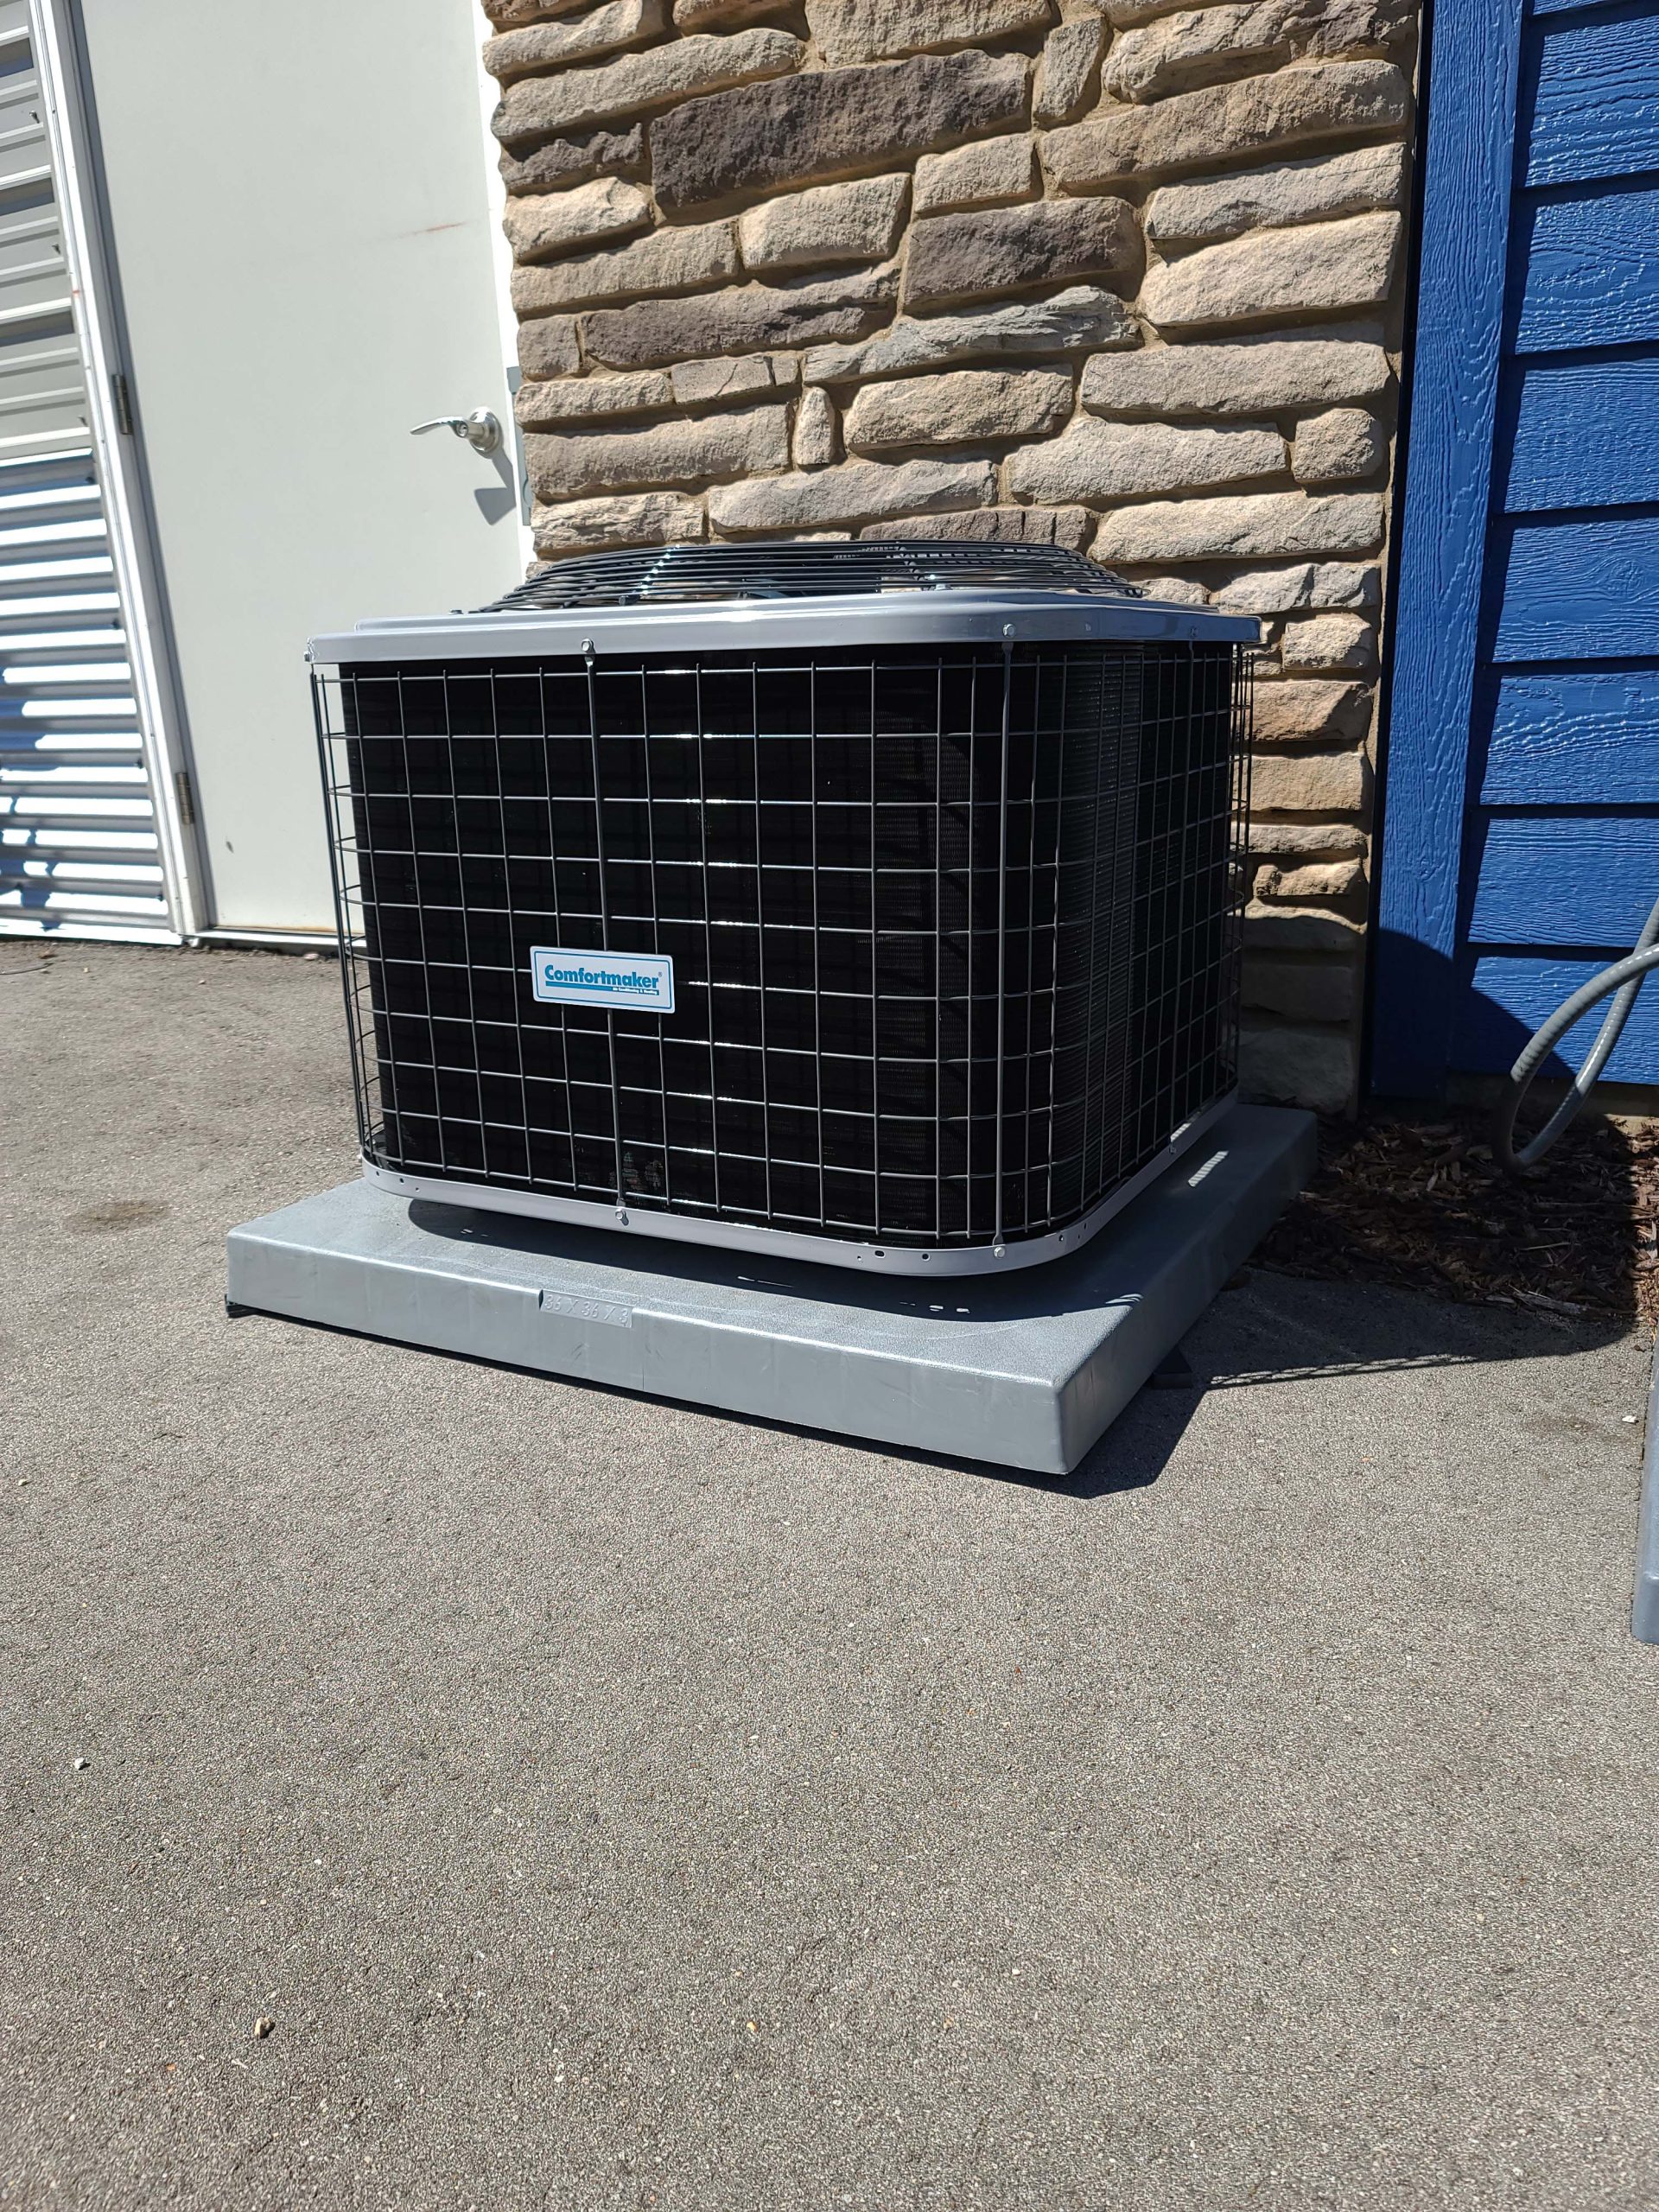 Do I need a heat pump or air conditioner for my home?